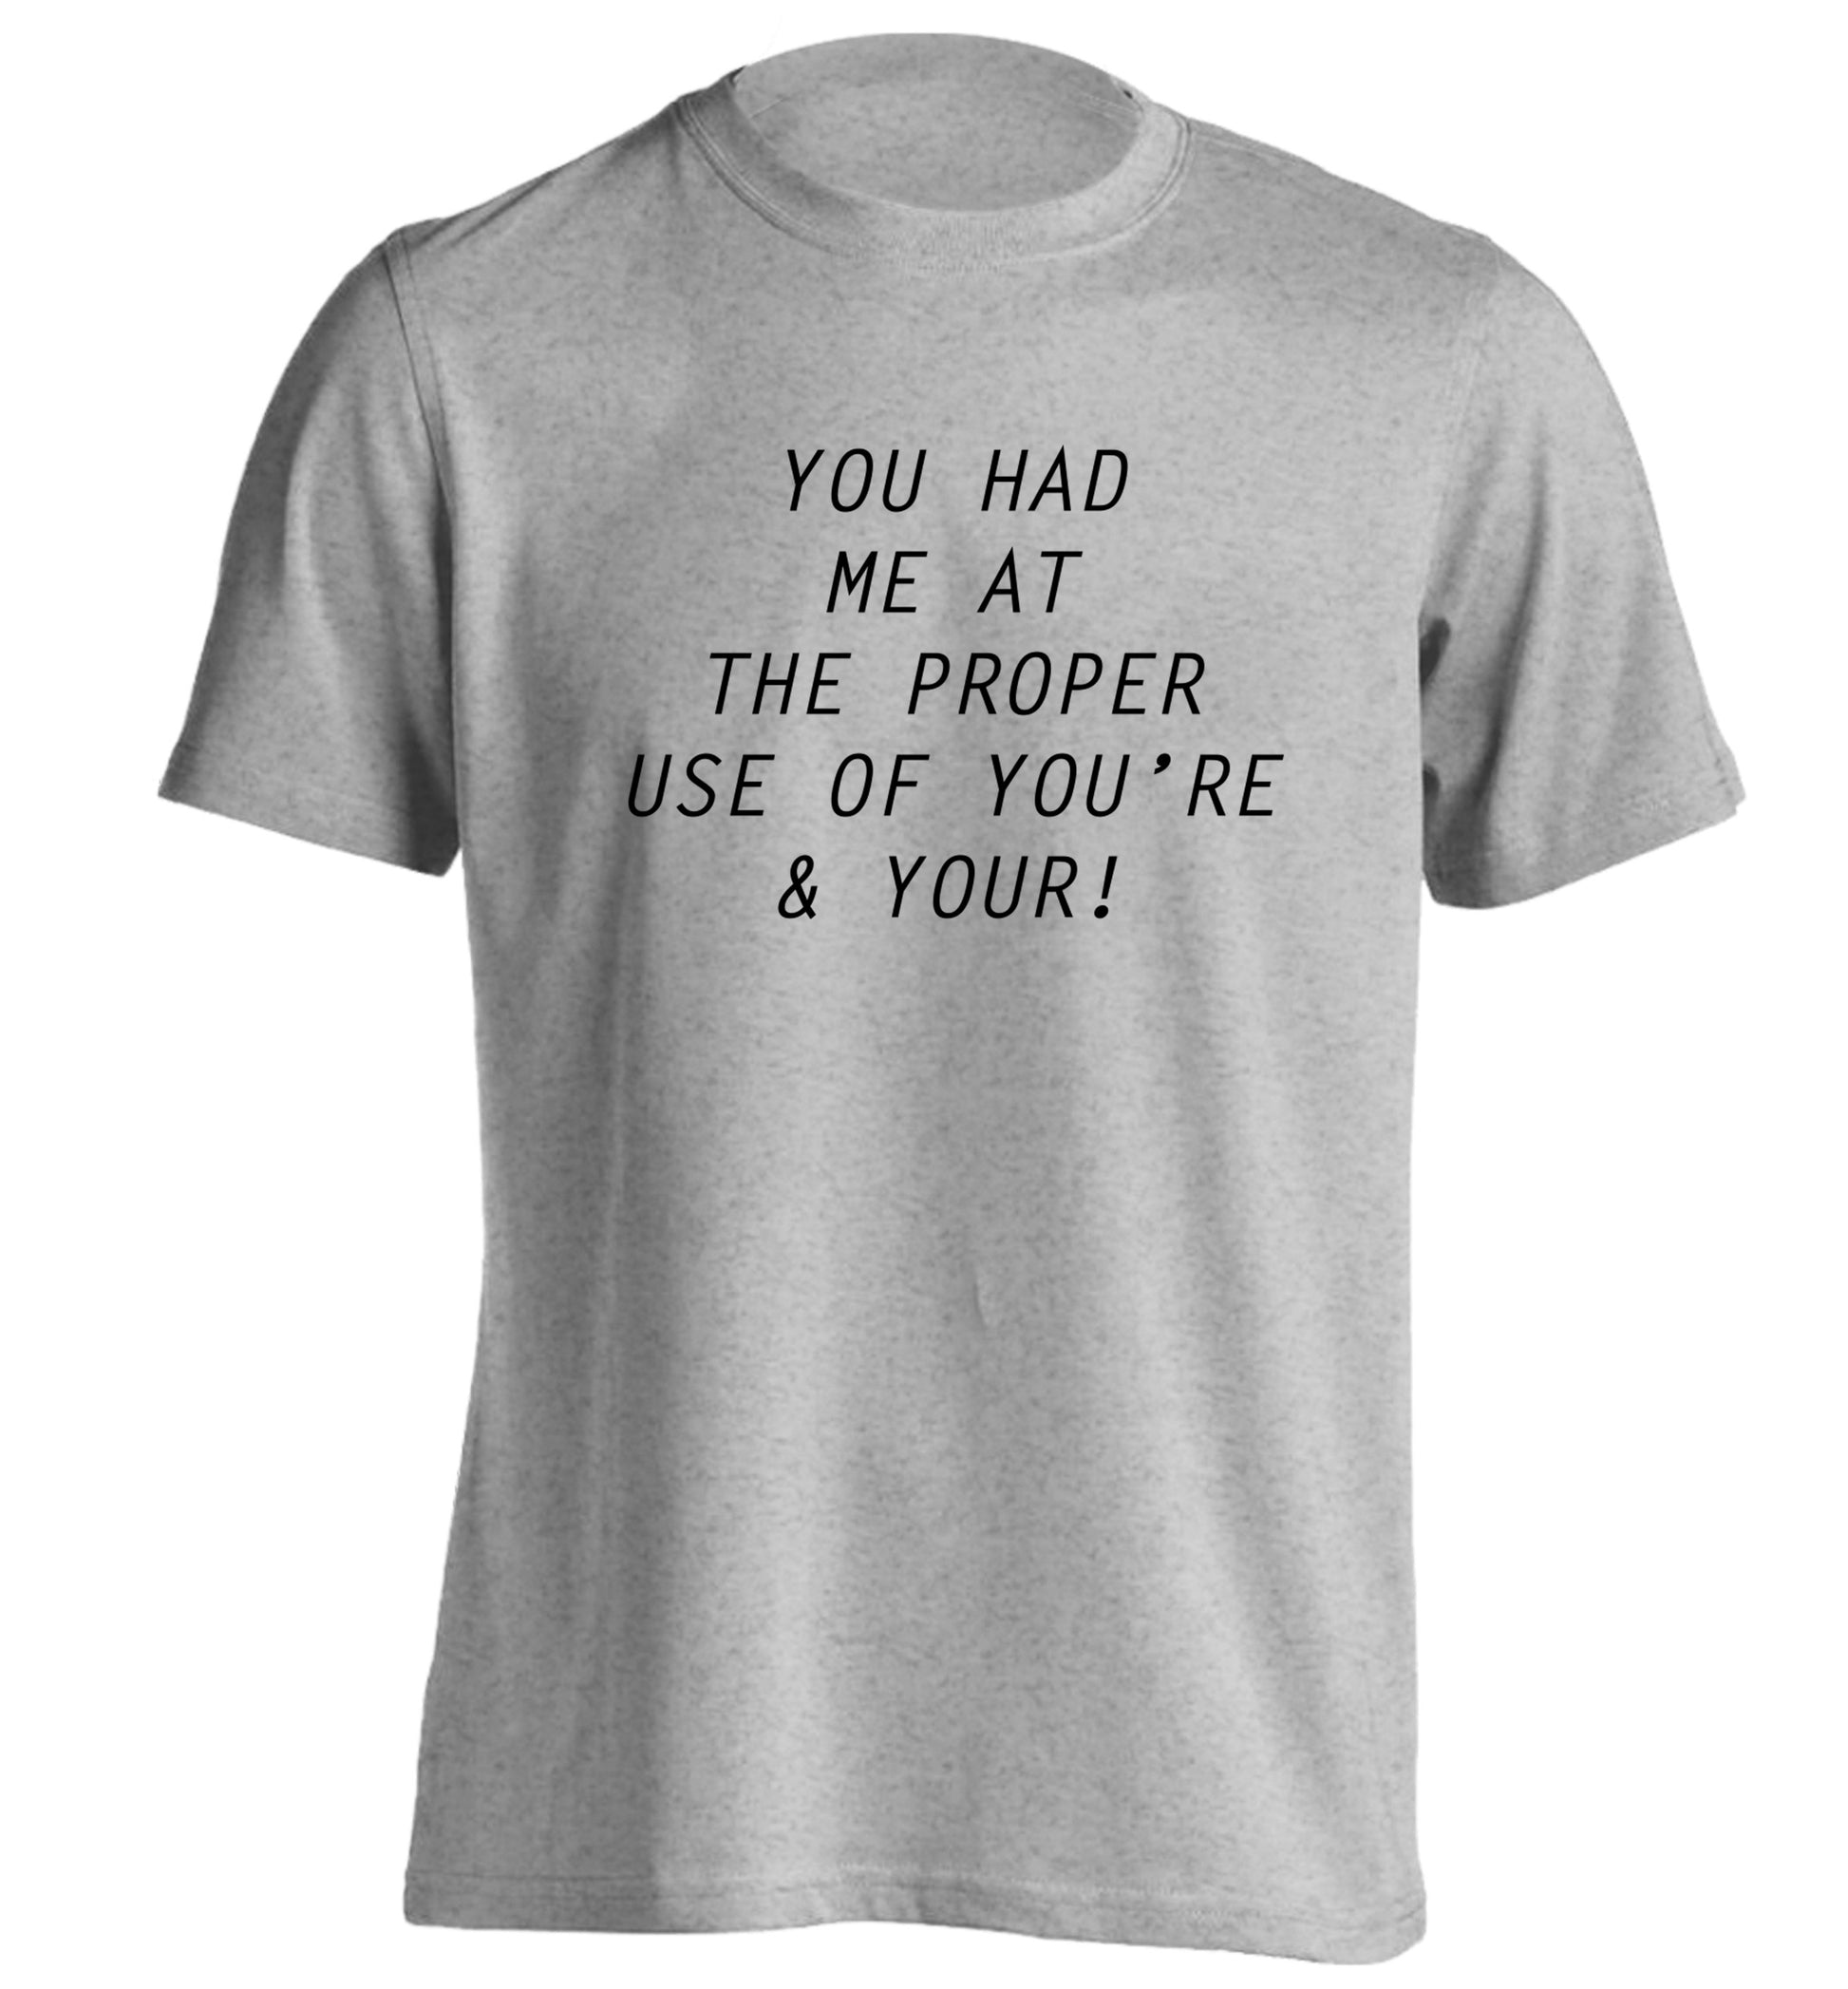 You had me at the proper use of you're and your adults unisex grey Tshirt 2XL